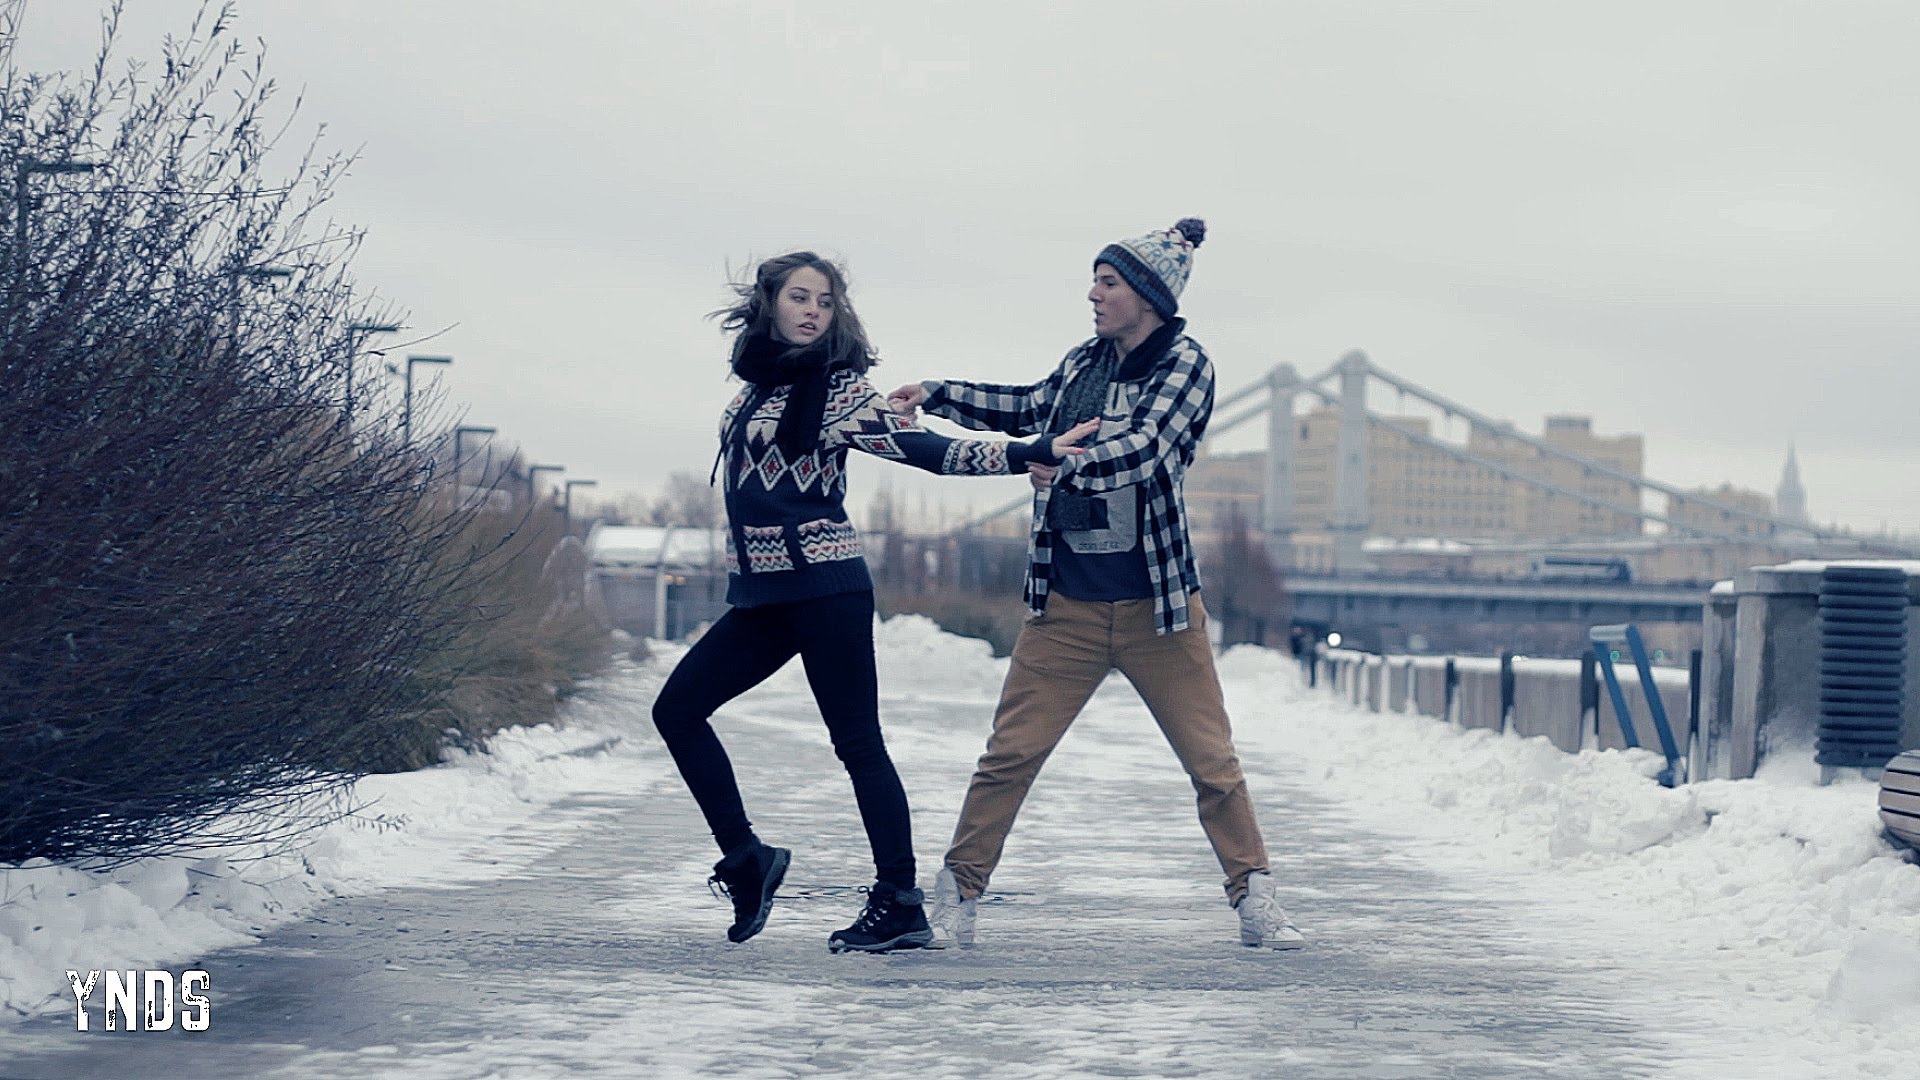 ROMANTIC WINTER STREET COUPLE DANCE | MOSCOW | YNDS - YouTube